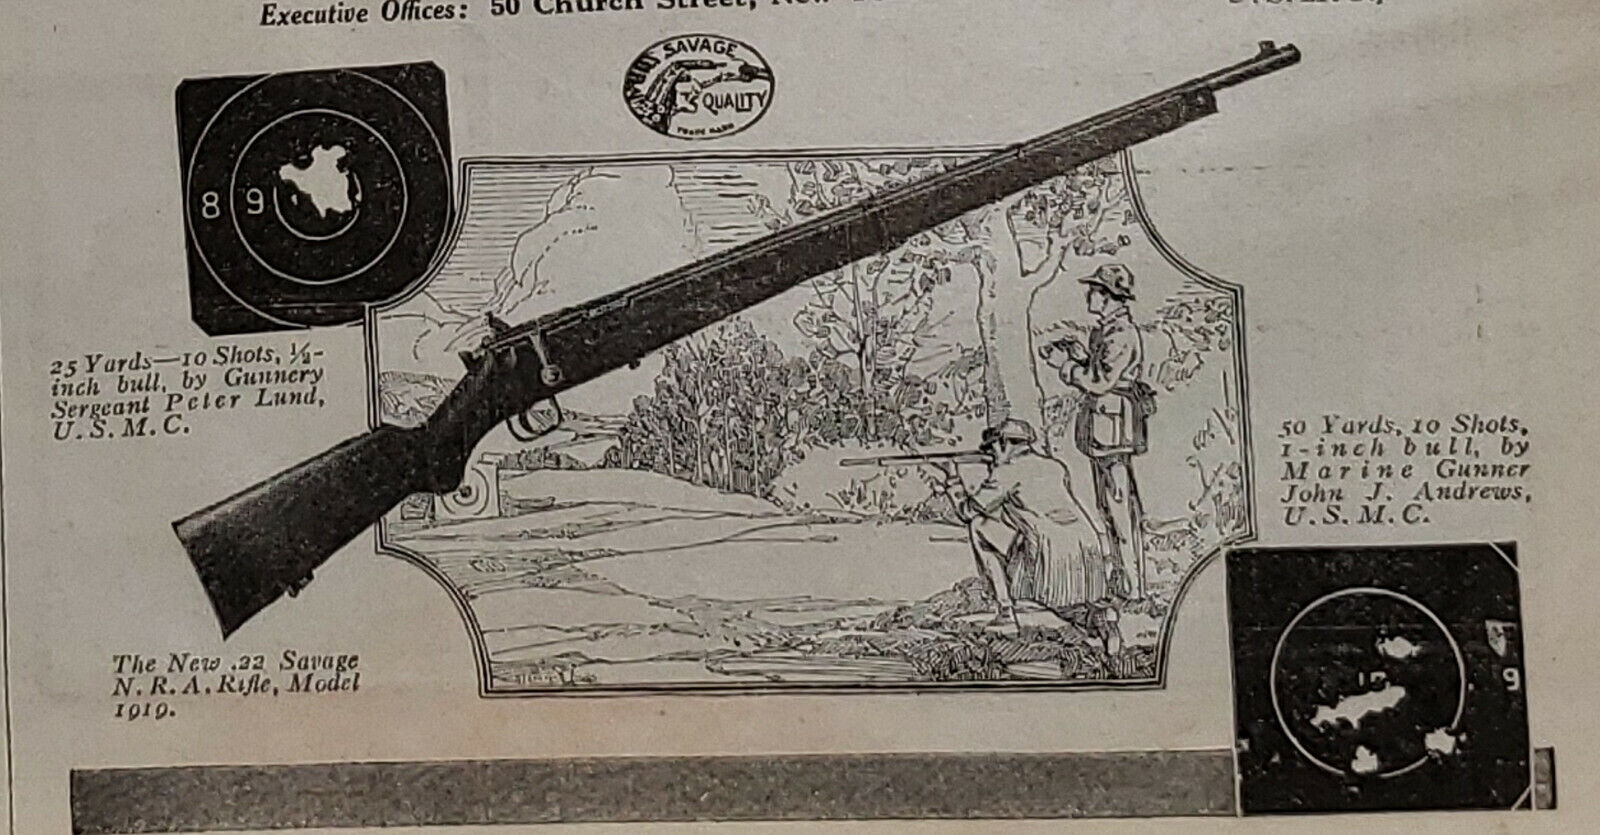 1919 .22 SAVAGE N.R.A. Rifle, Model 1919 Print Ad from The Literary Digest 1RT37